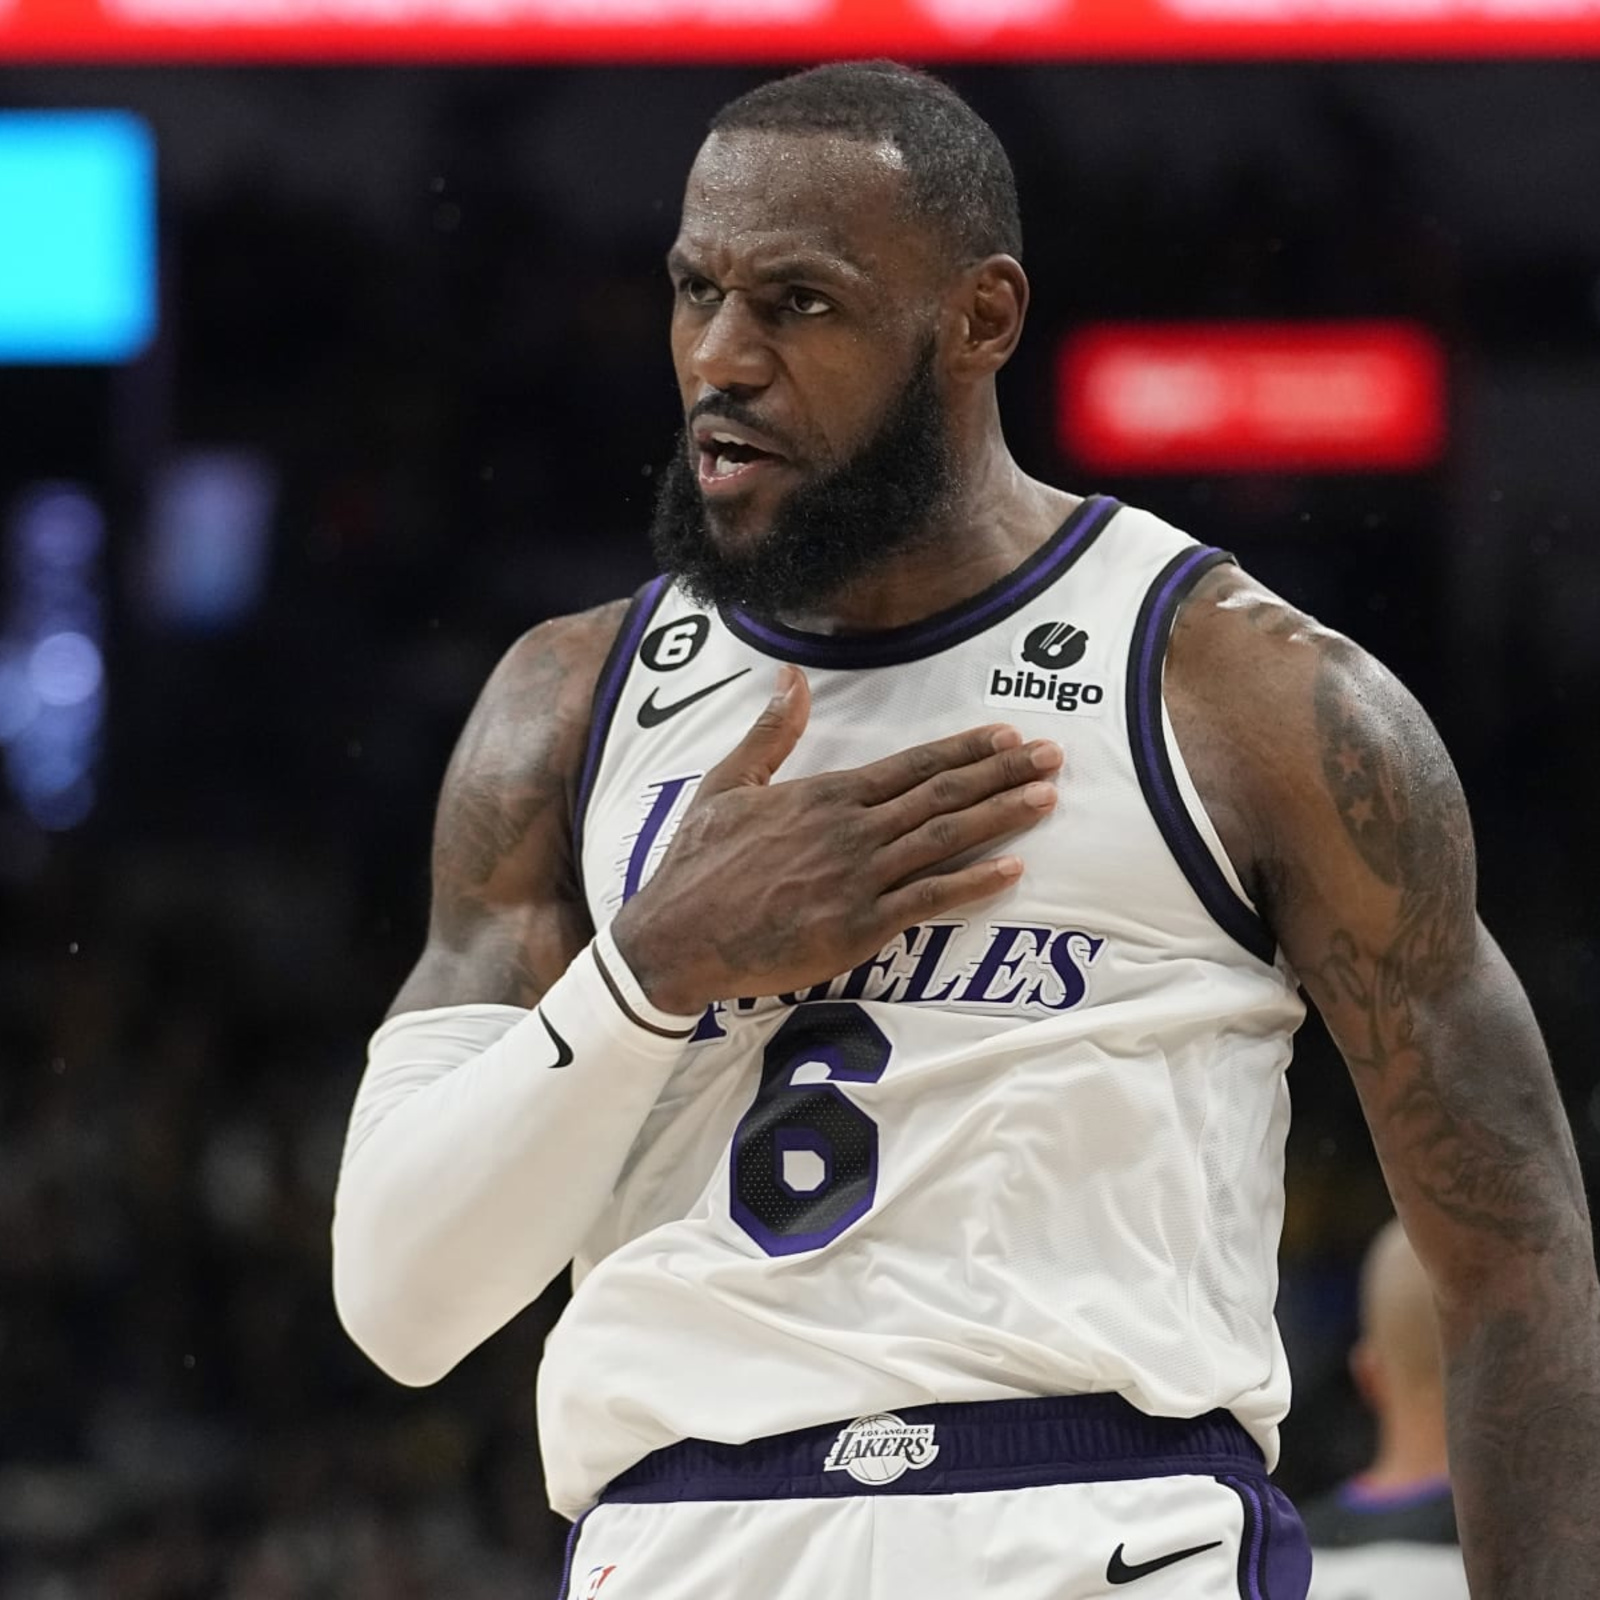 NBA - LeBron James (28 PTS, 12 REB, 8 AST) and the Los Angeles Lakers win  Game 4 and take a 3-1 series lead! Game 5: Friday at 9:00pm/et on ABC  #NBAFinals